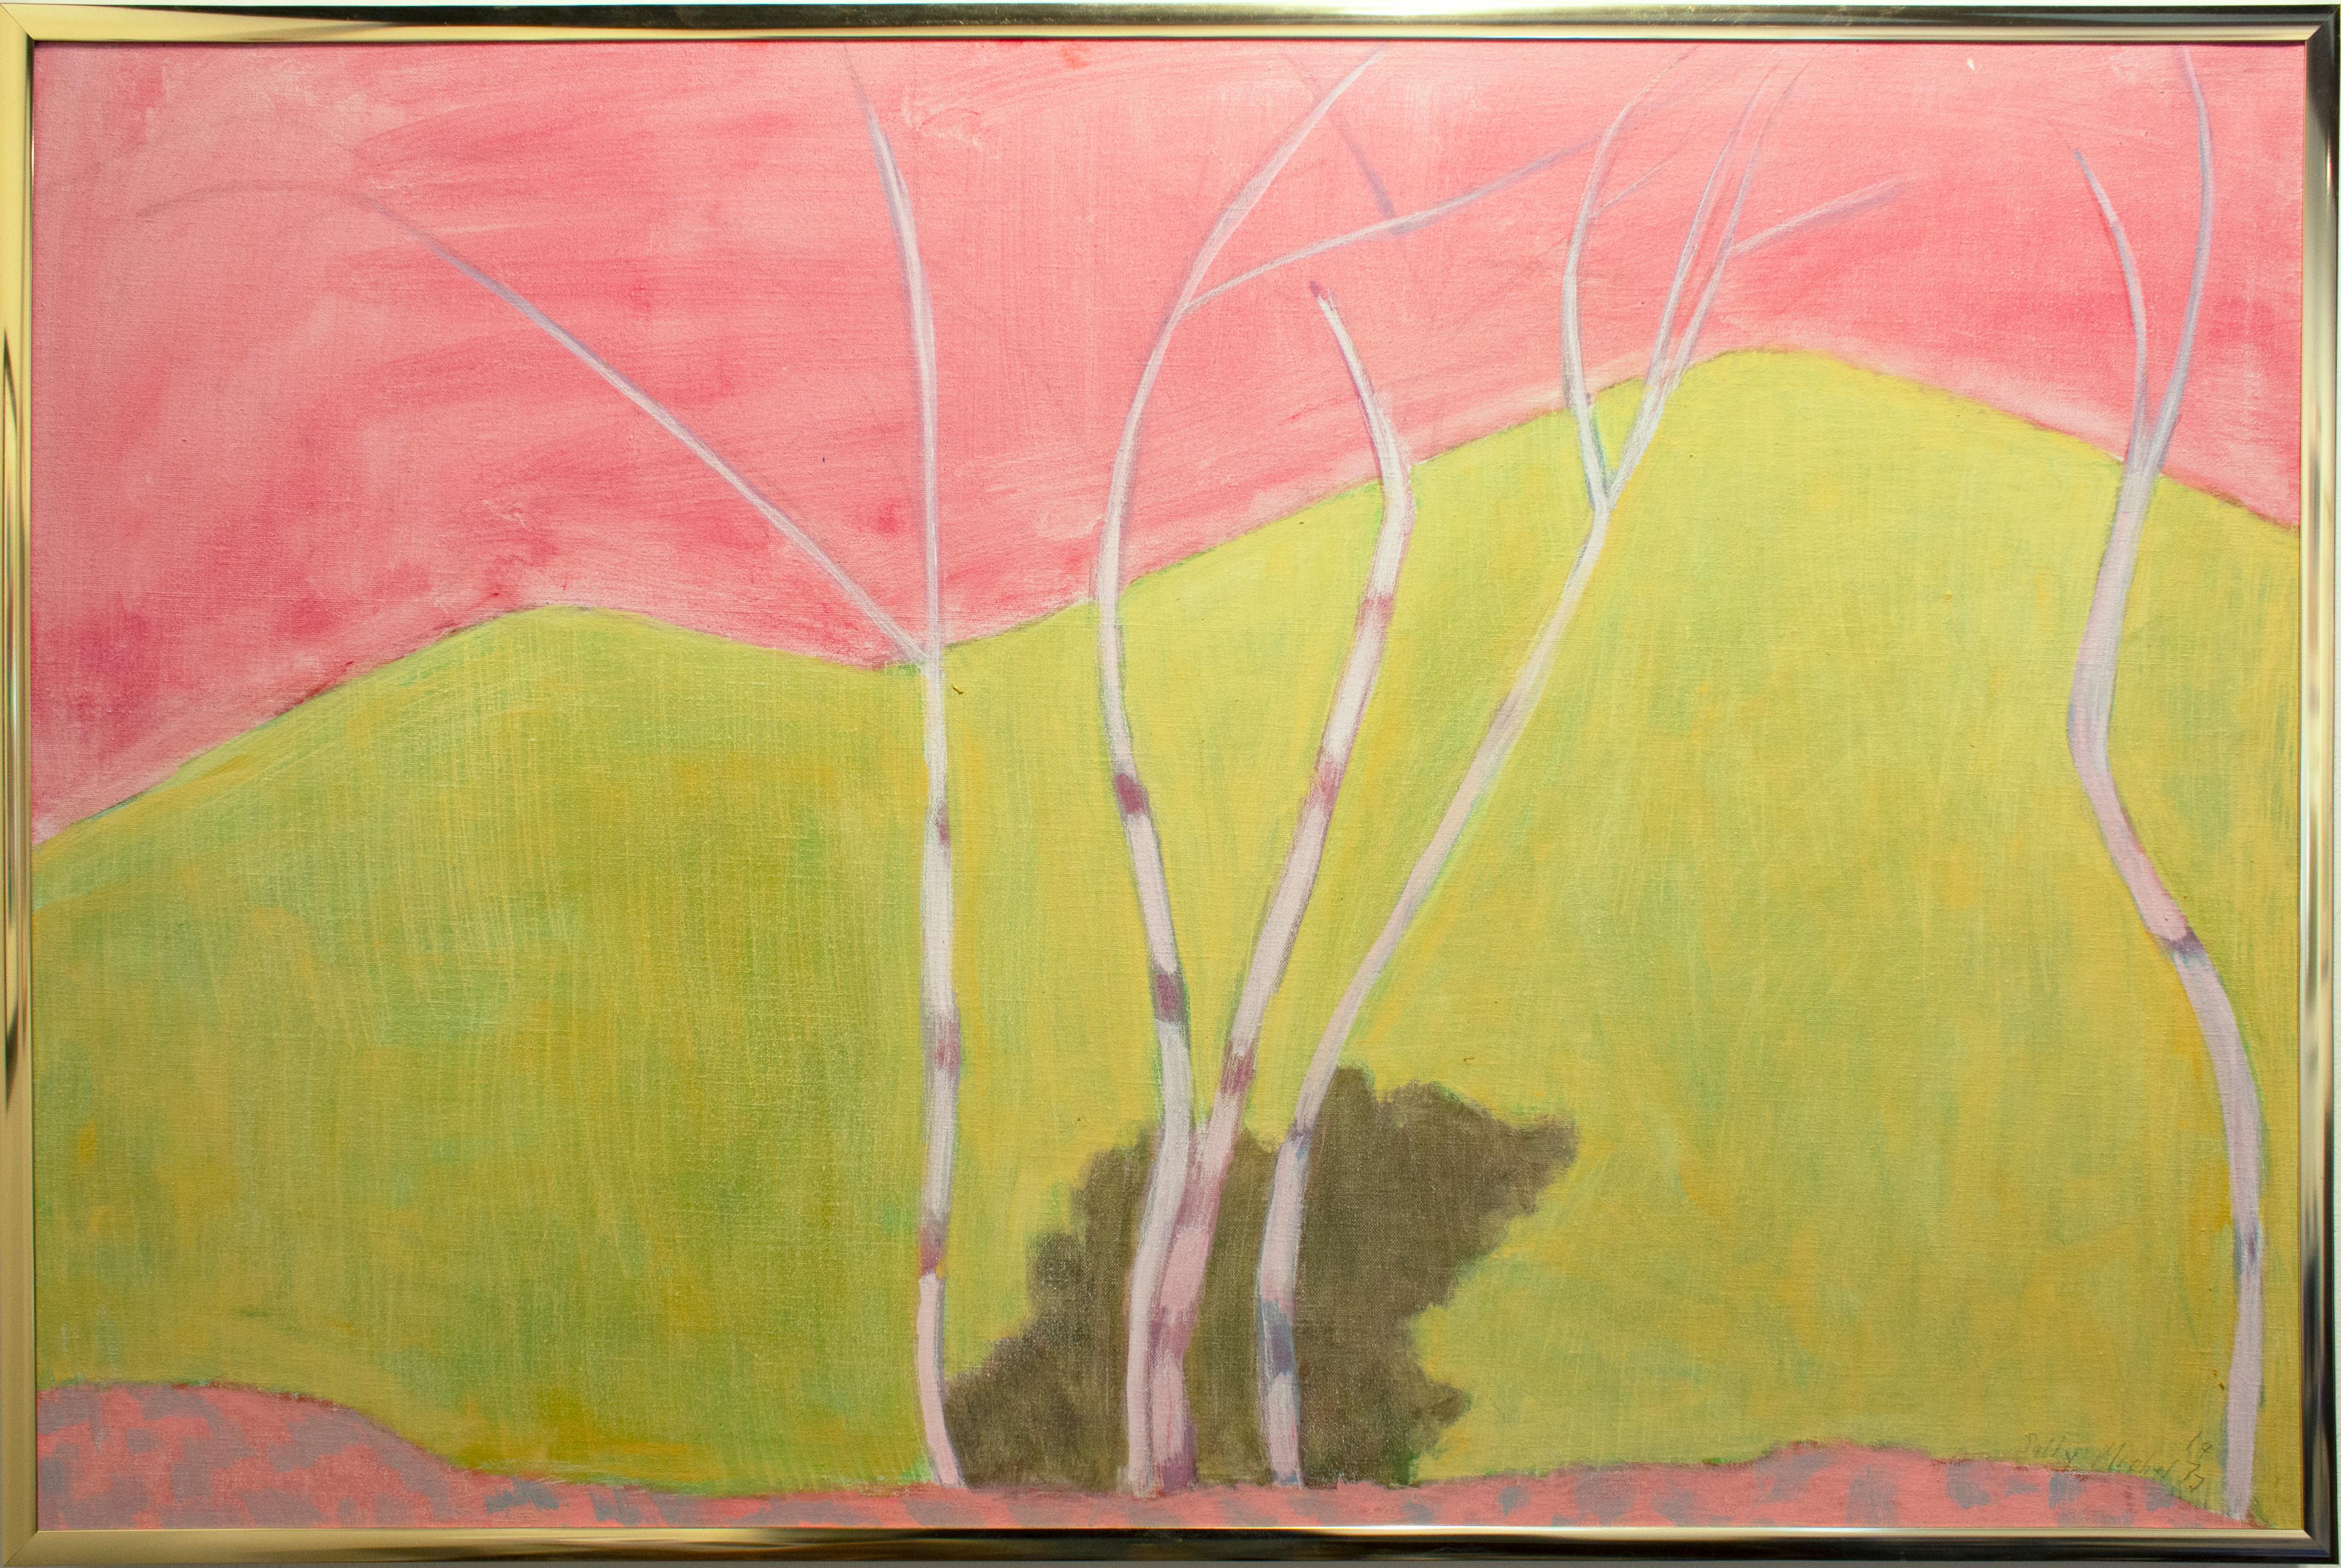 "Five Birches" by Sally Michel Avery, Oil on canvas, 1977